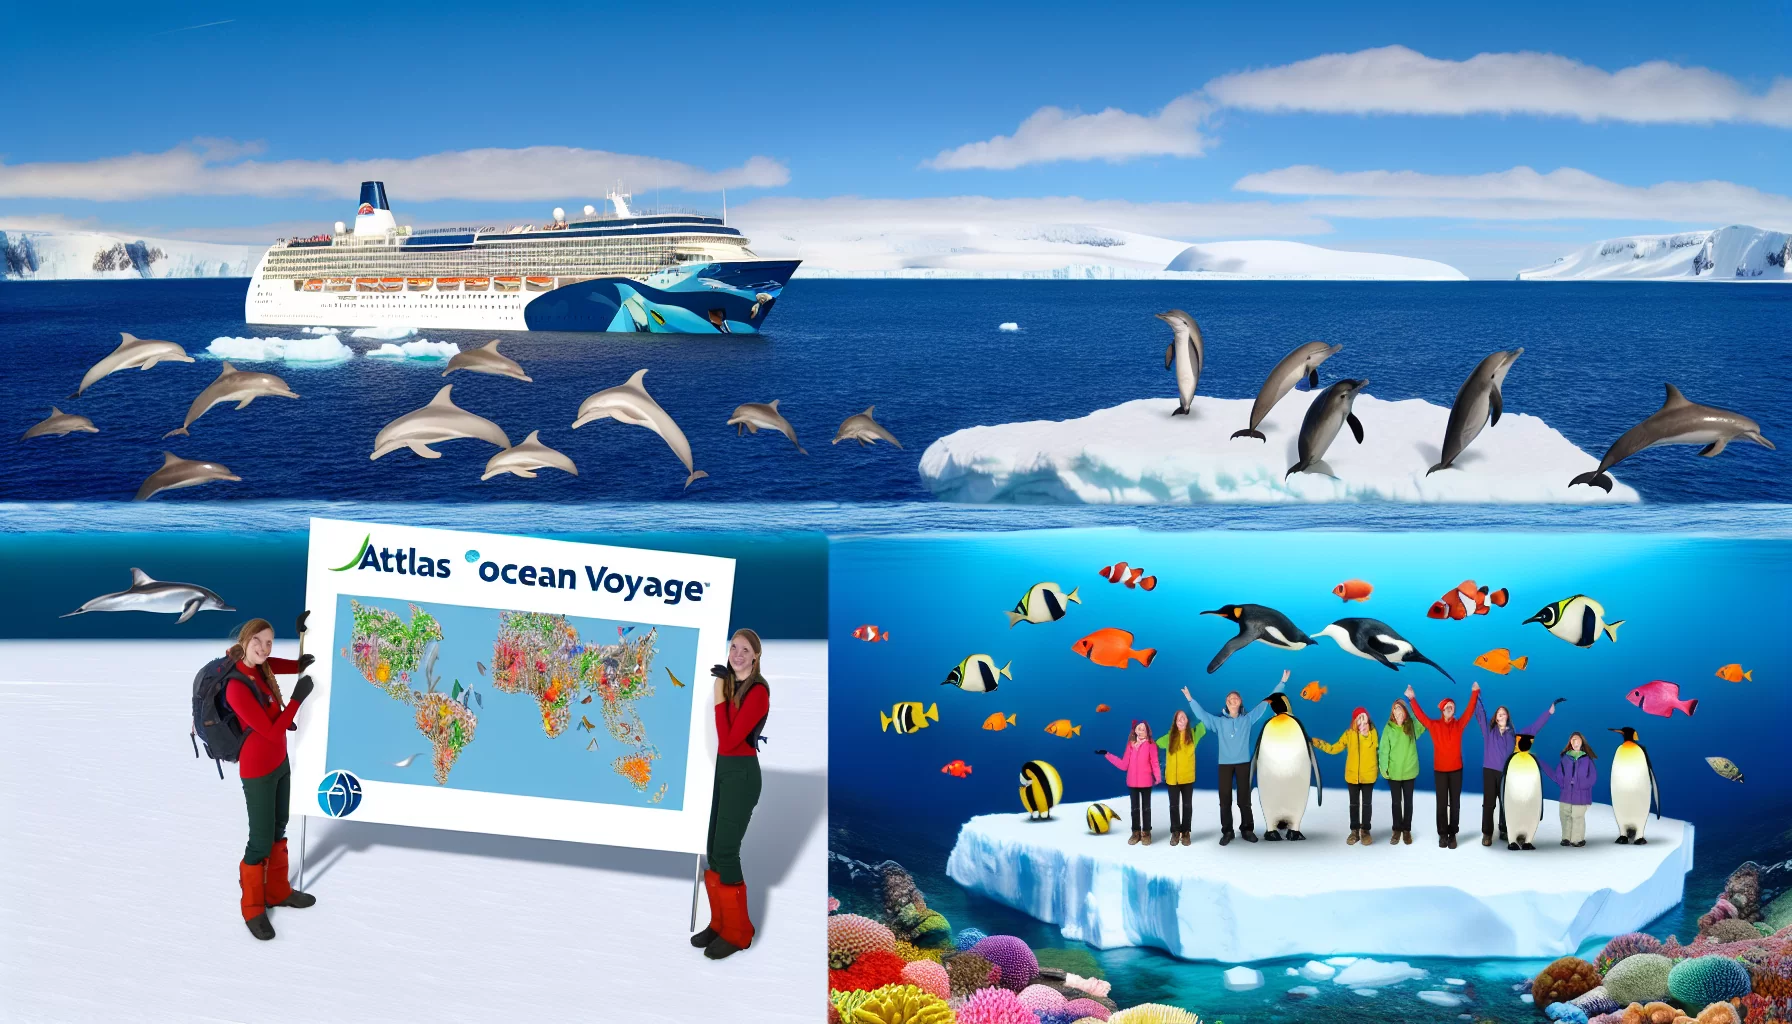 Atlas ocean voyages joins forces with global penguin society for sustainable tourism and conservation